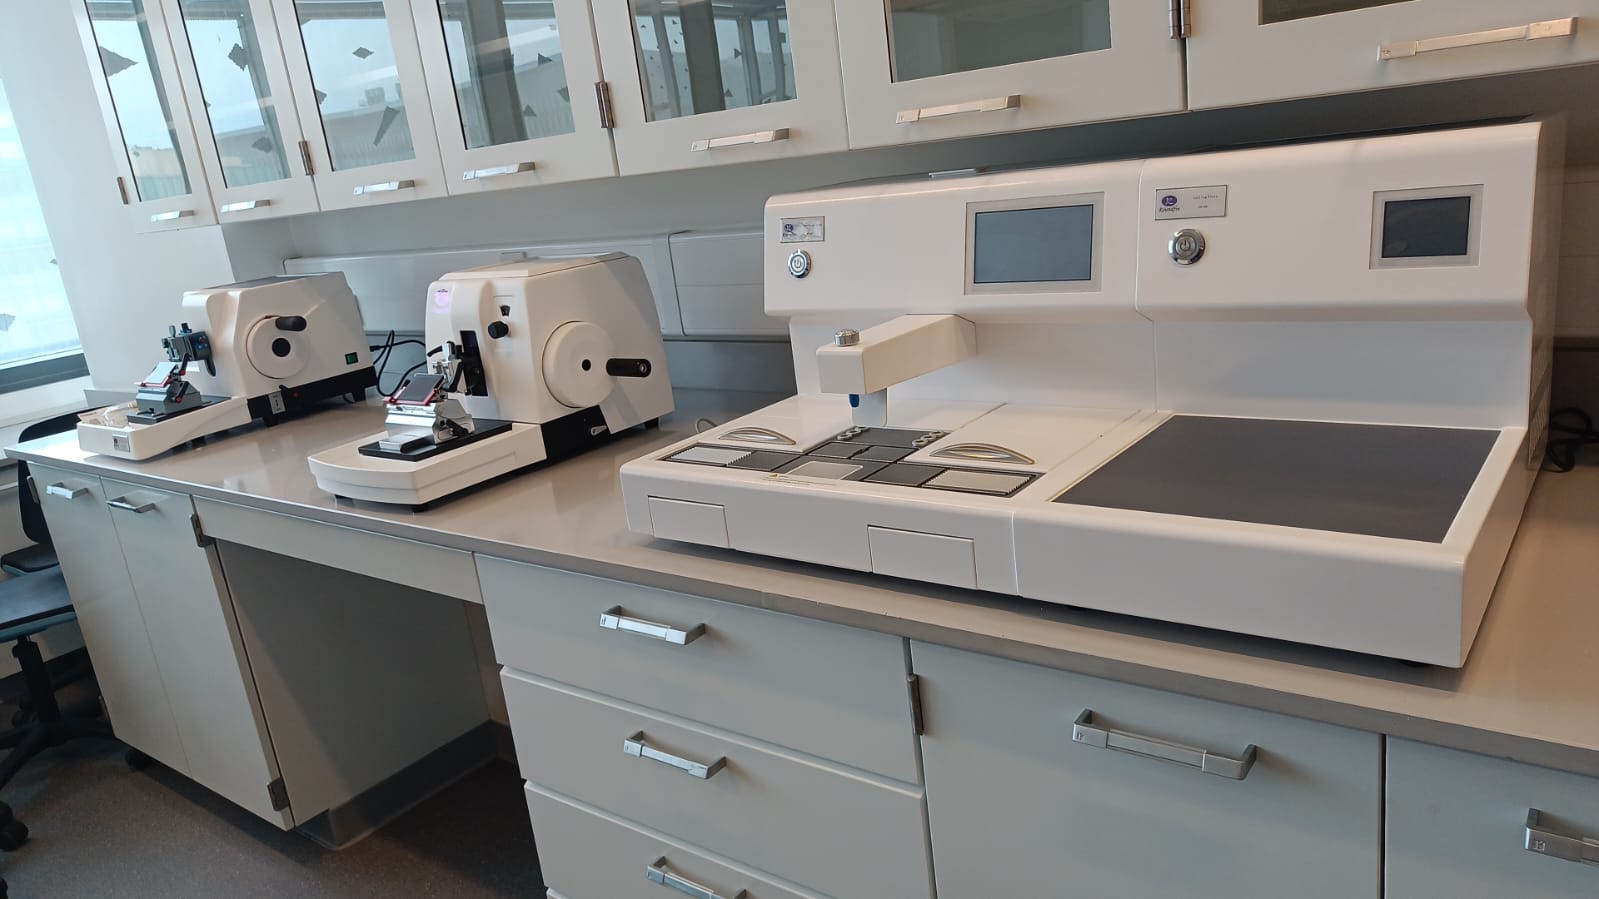 A University in Kuwait Received Pathology Equipment